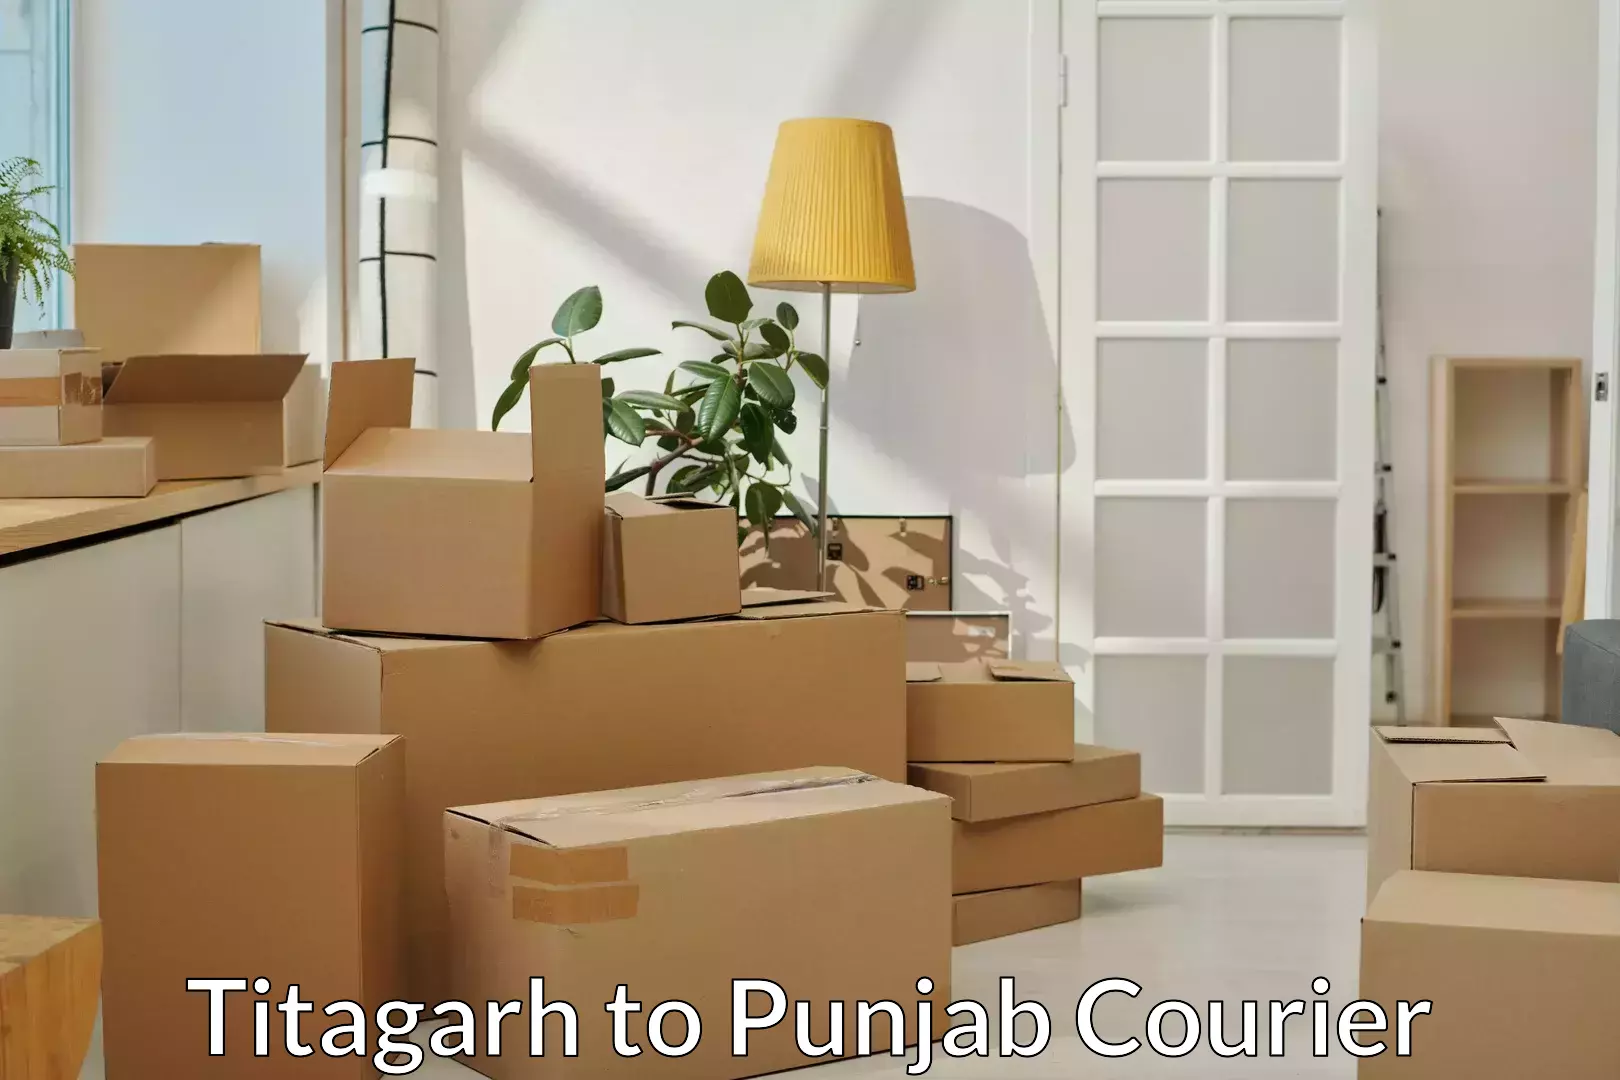 Moving and storage services Titagarh to Mohali